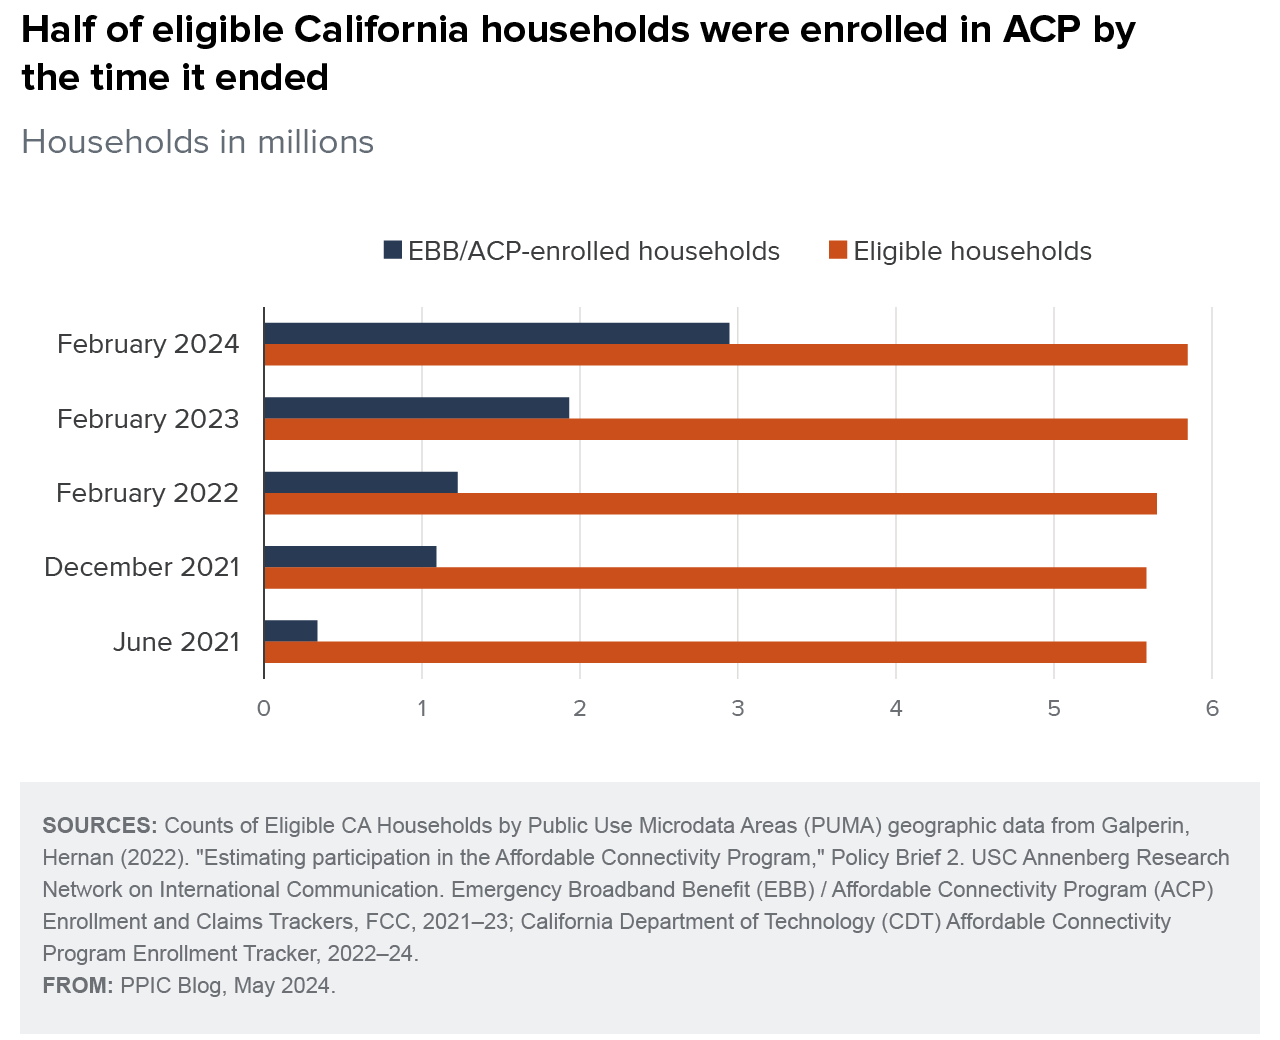 figure - Half of eligible California households were enrolled in ACP by the time it ended